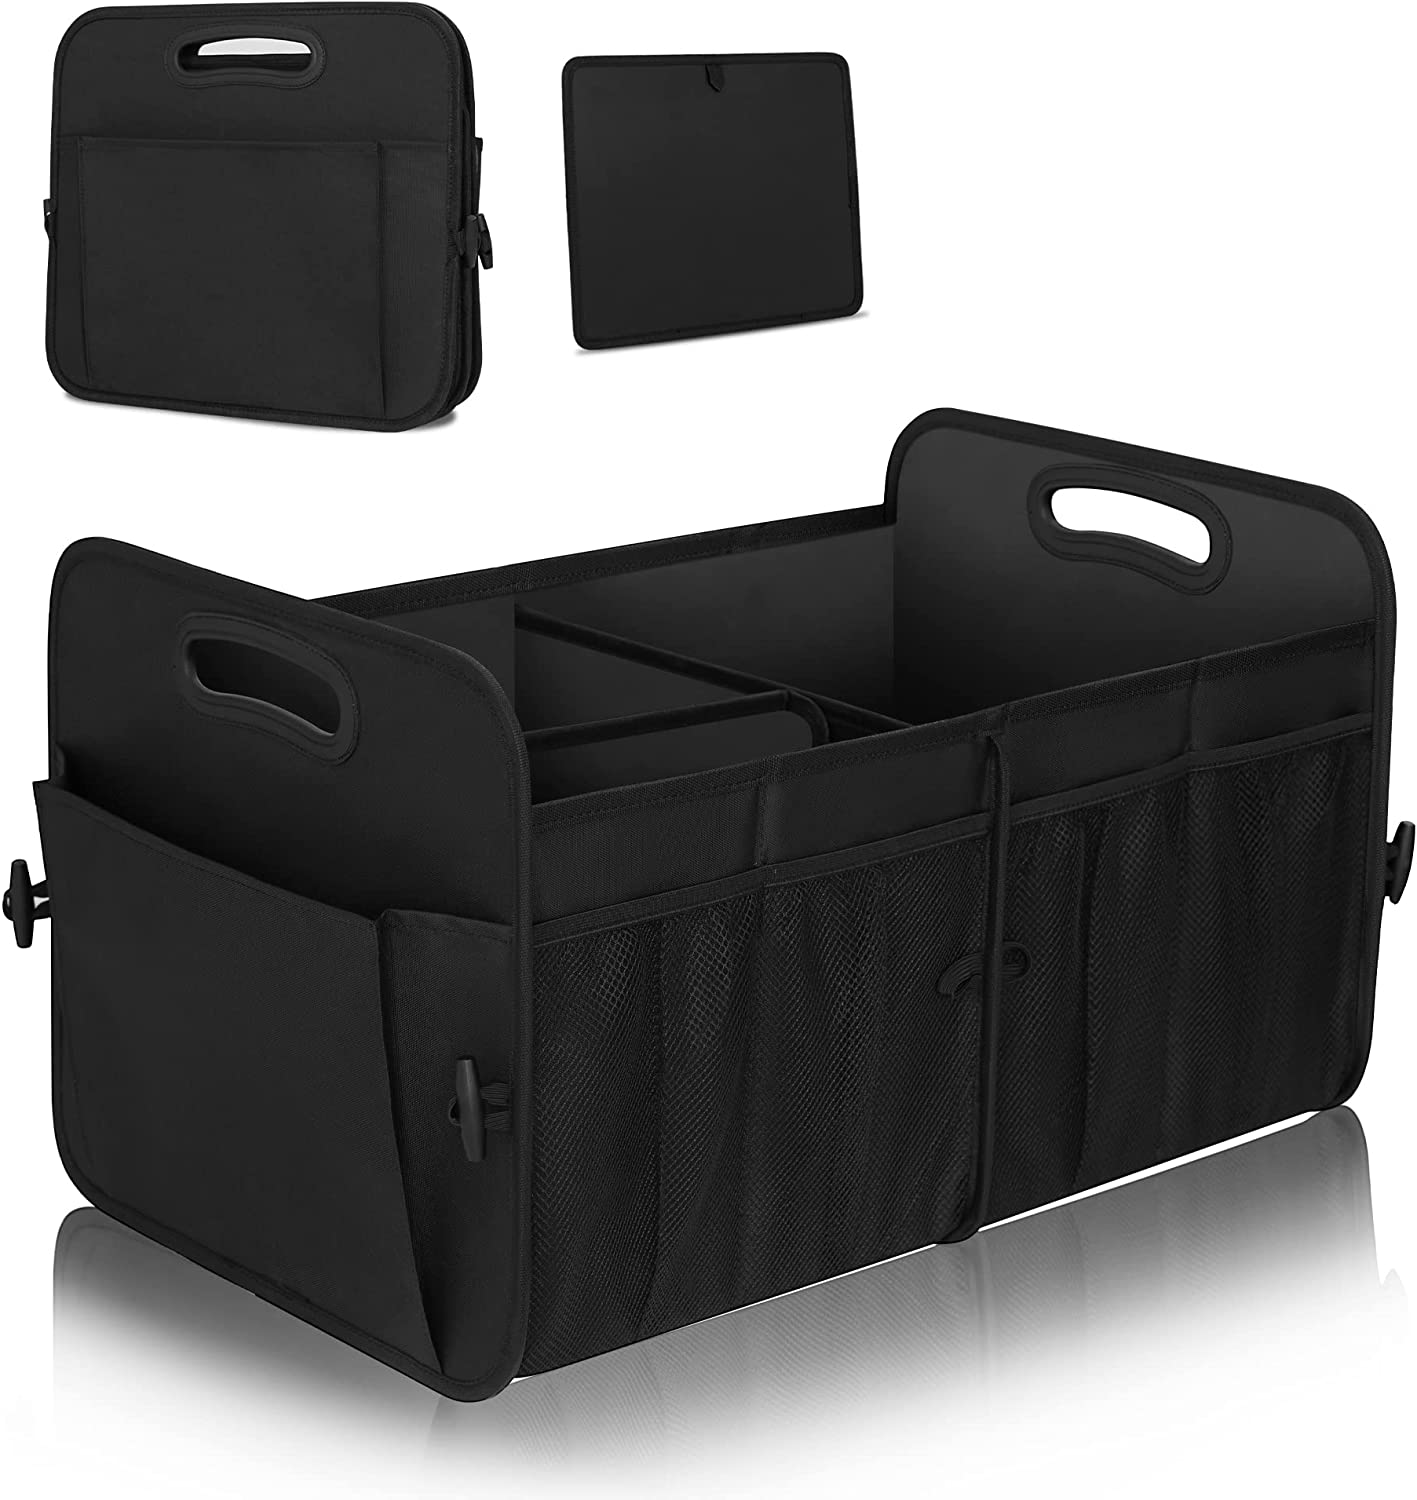 Car Trunk Organizer,Car Storage Organizer with 72L Large Capacity Waterproof Collapsible and 11 Pockets, Trunk Organizer for Car Suv/Jeep/Sedan